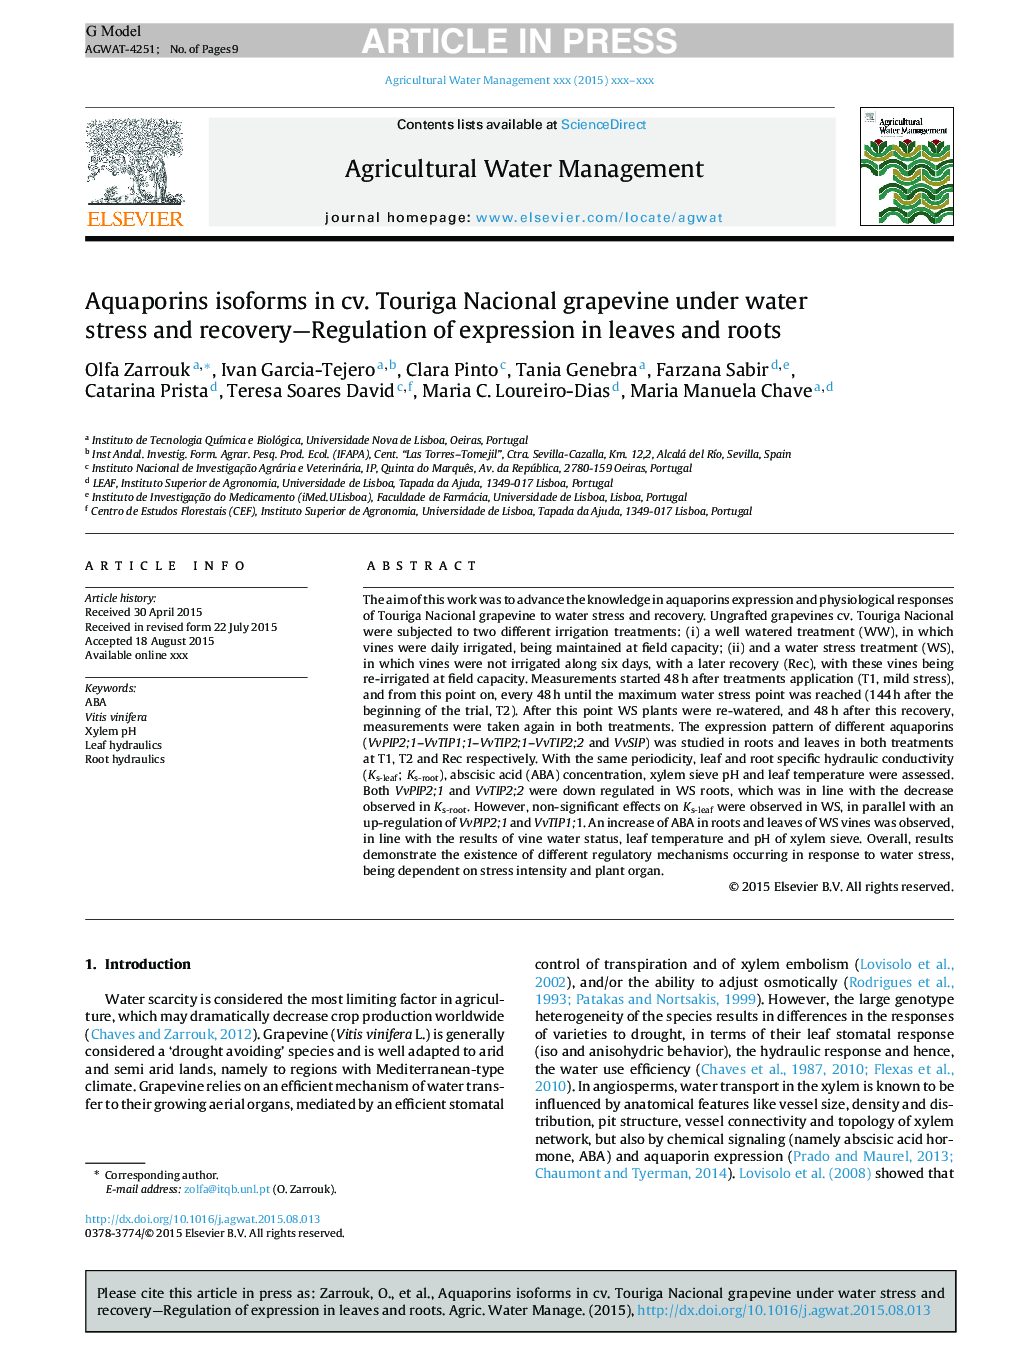 Aquaporins isoforms in cv. Touriga Nacional grapevine under water stress and recovery-Regulation of expression in leaves and roots